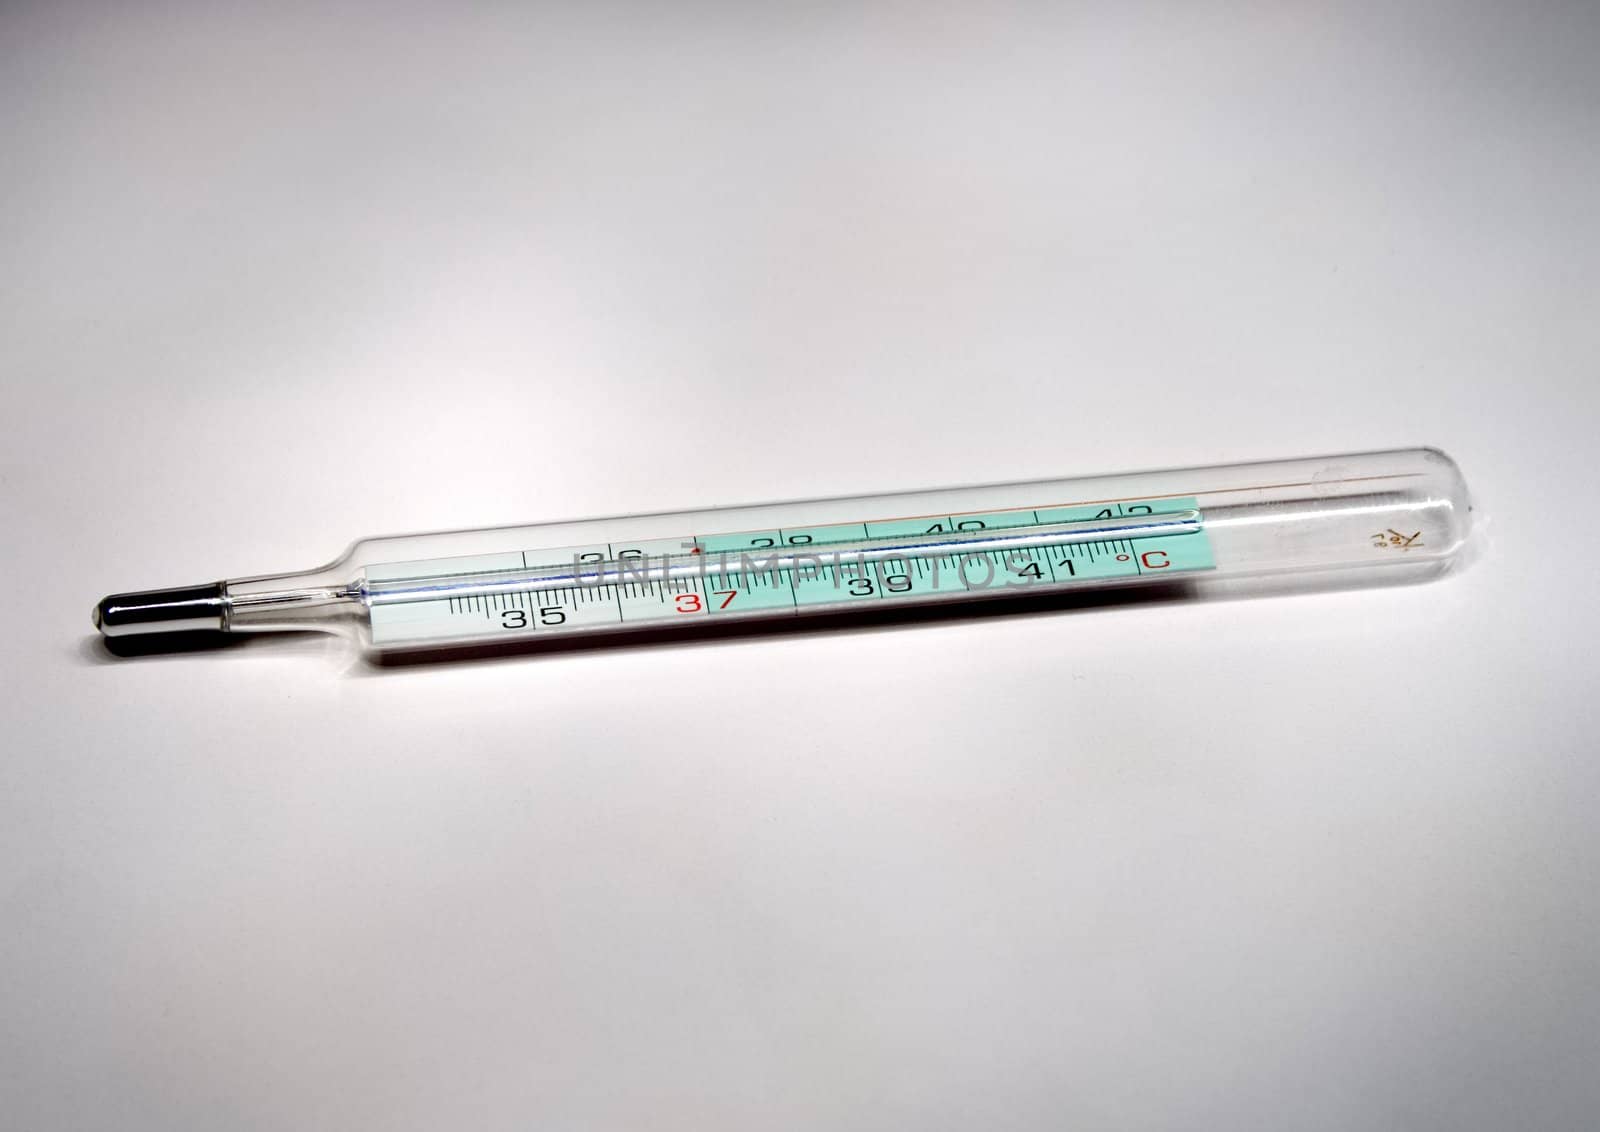 An old type of mercury clinical thermometer - close up